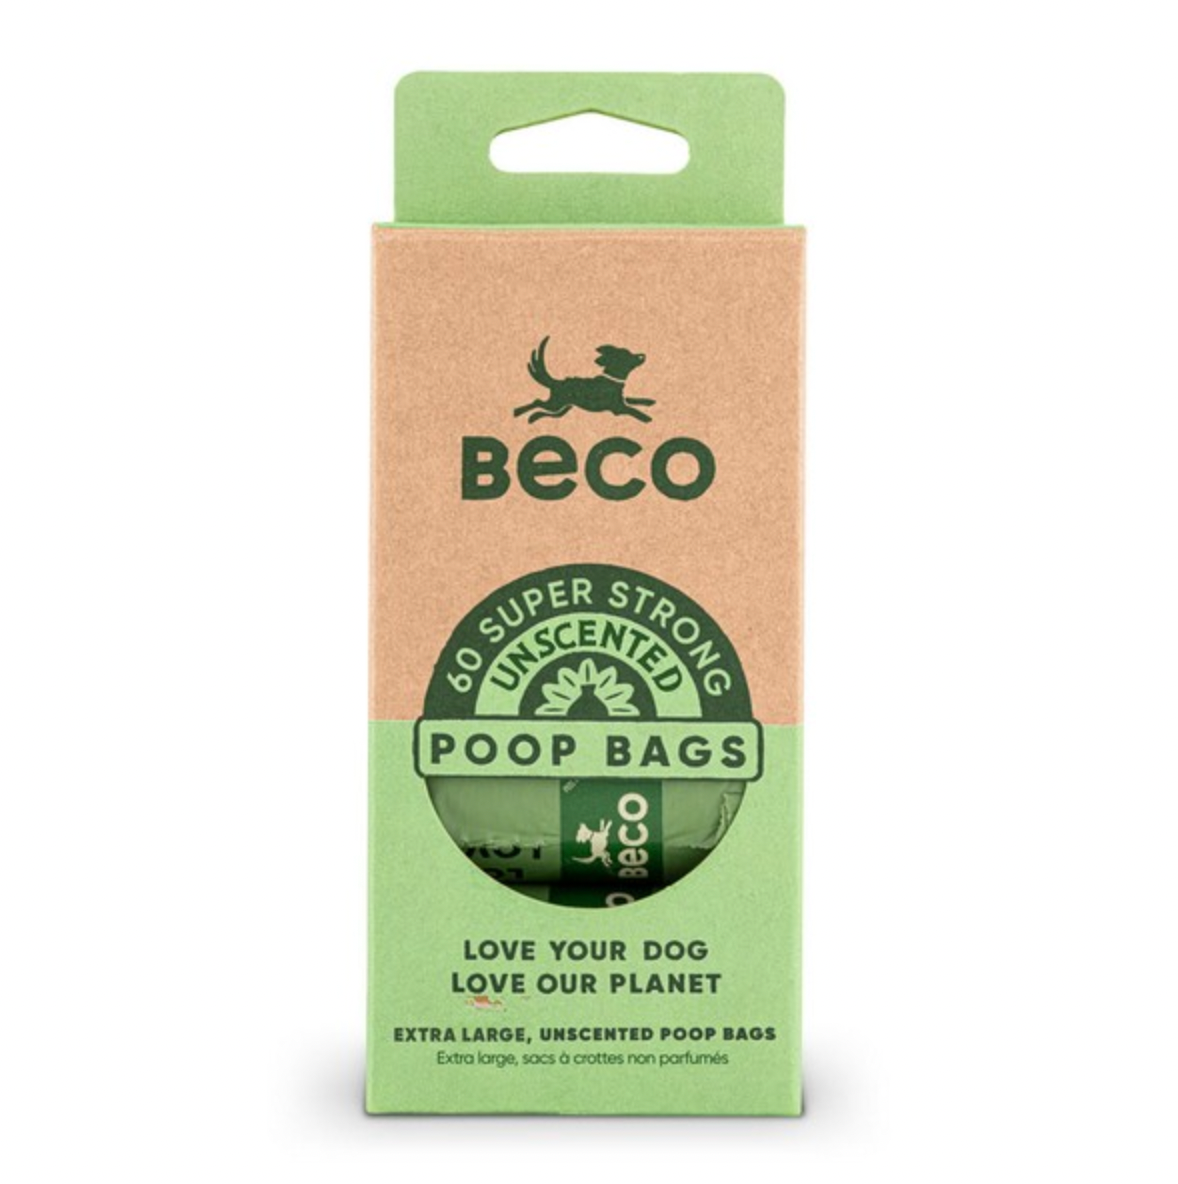 Beco Super Strong Unscented Compostable Poop Bags (270 Bags)